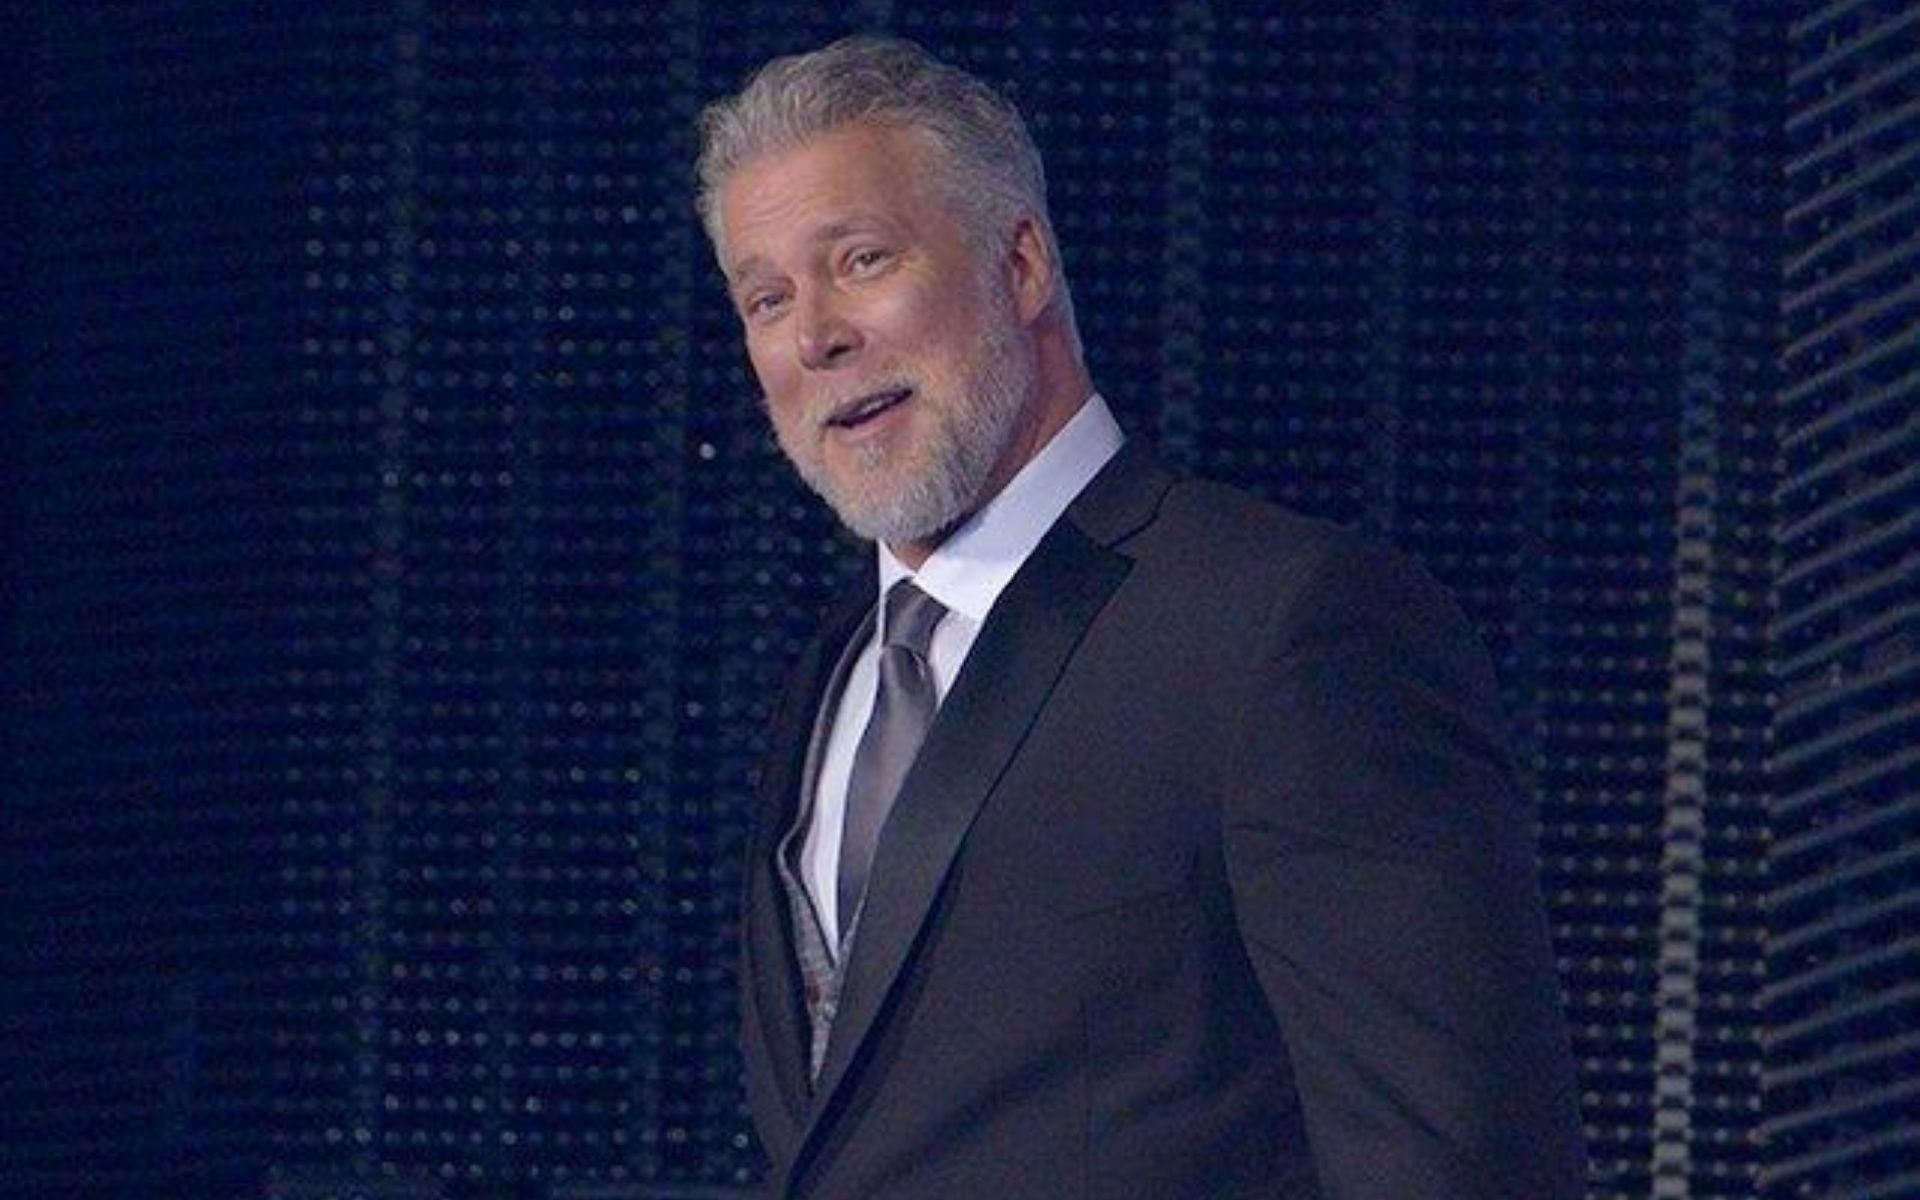 Kevin Nash during his induction into the Hall of Fame in 2015